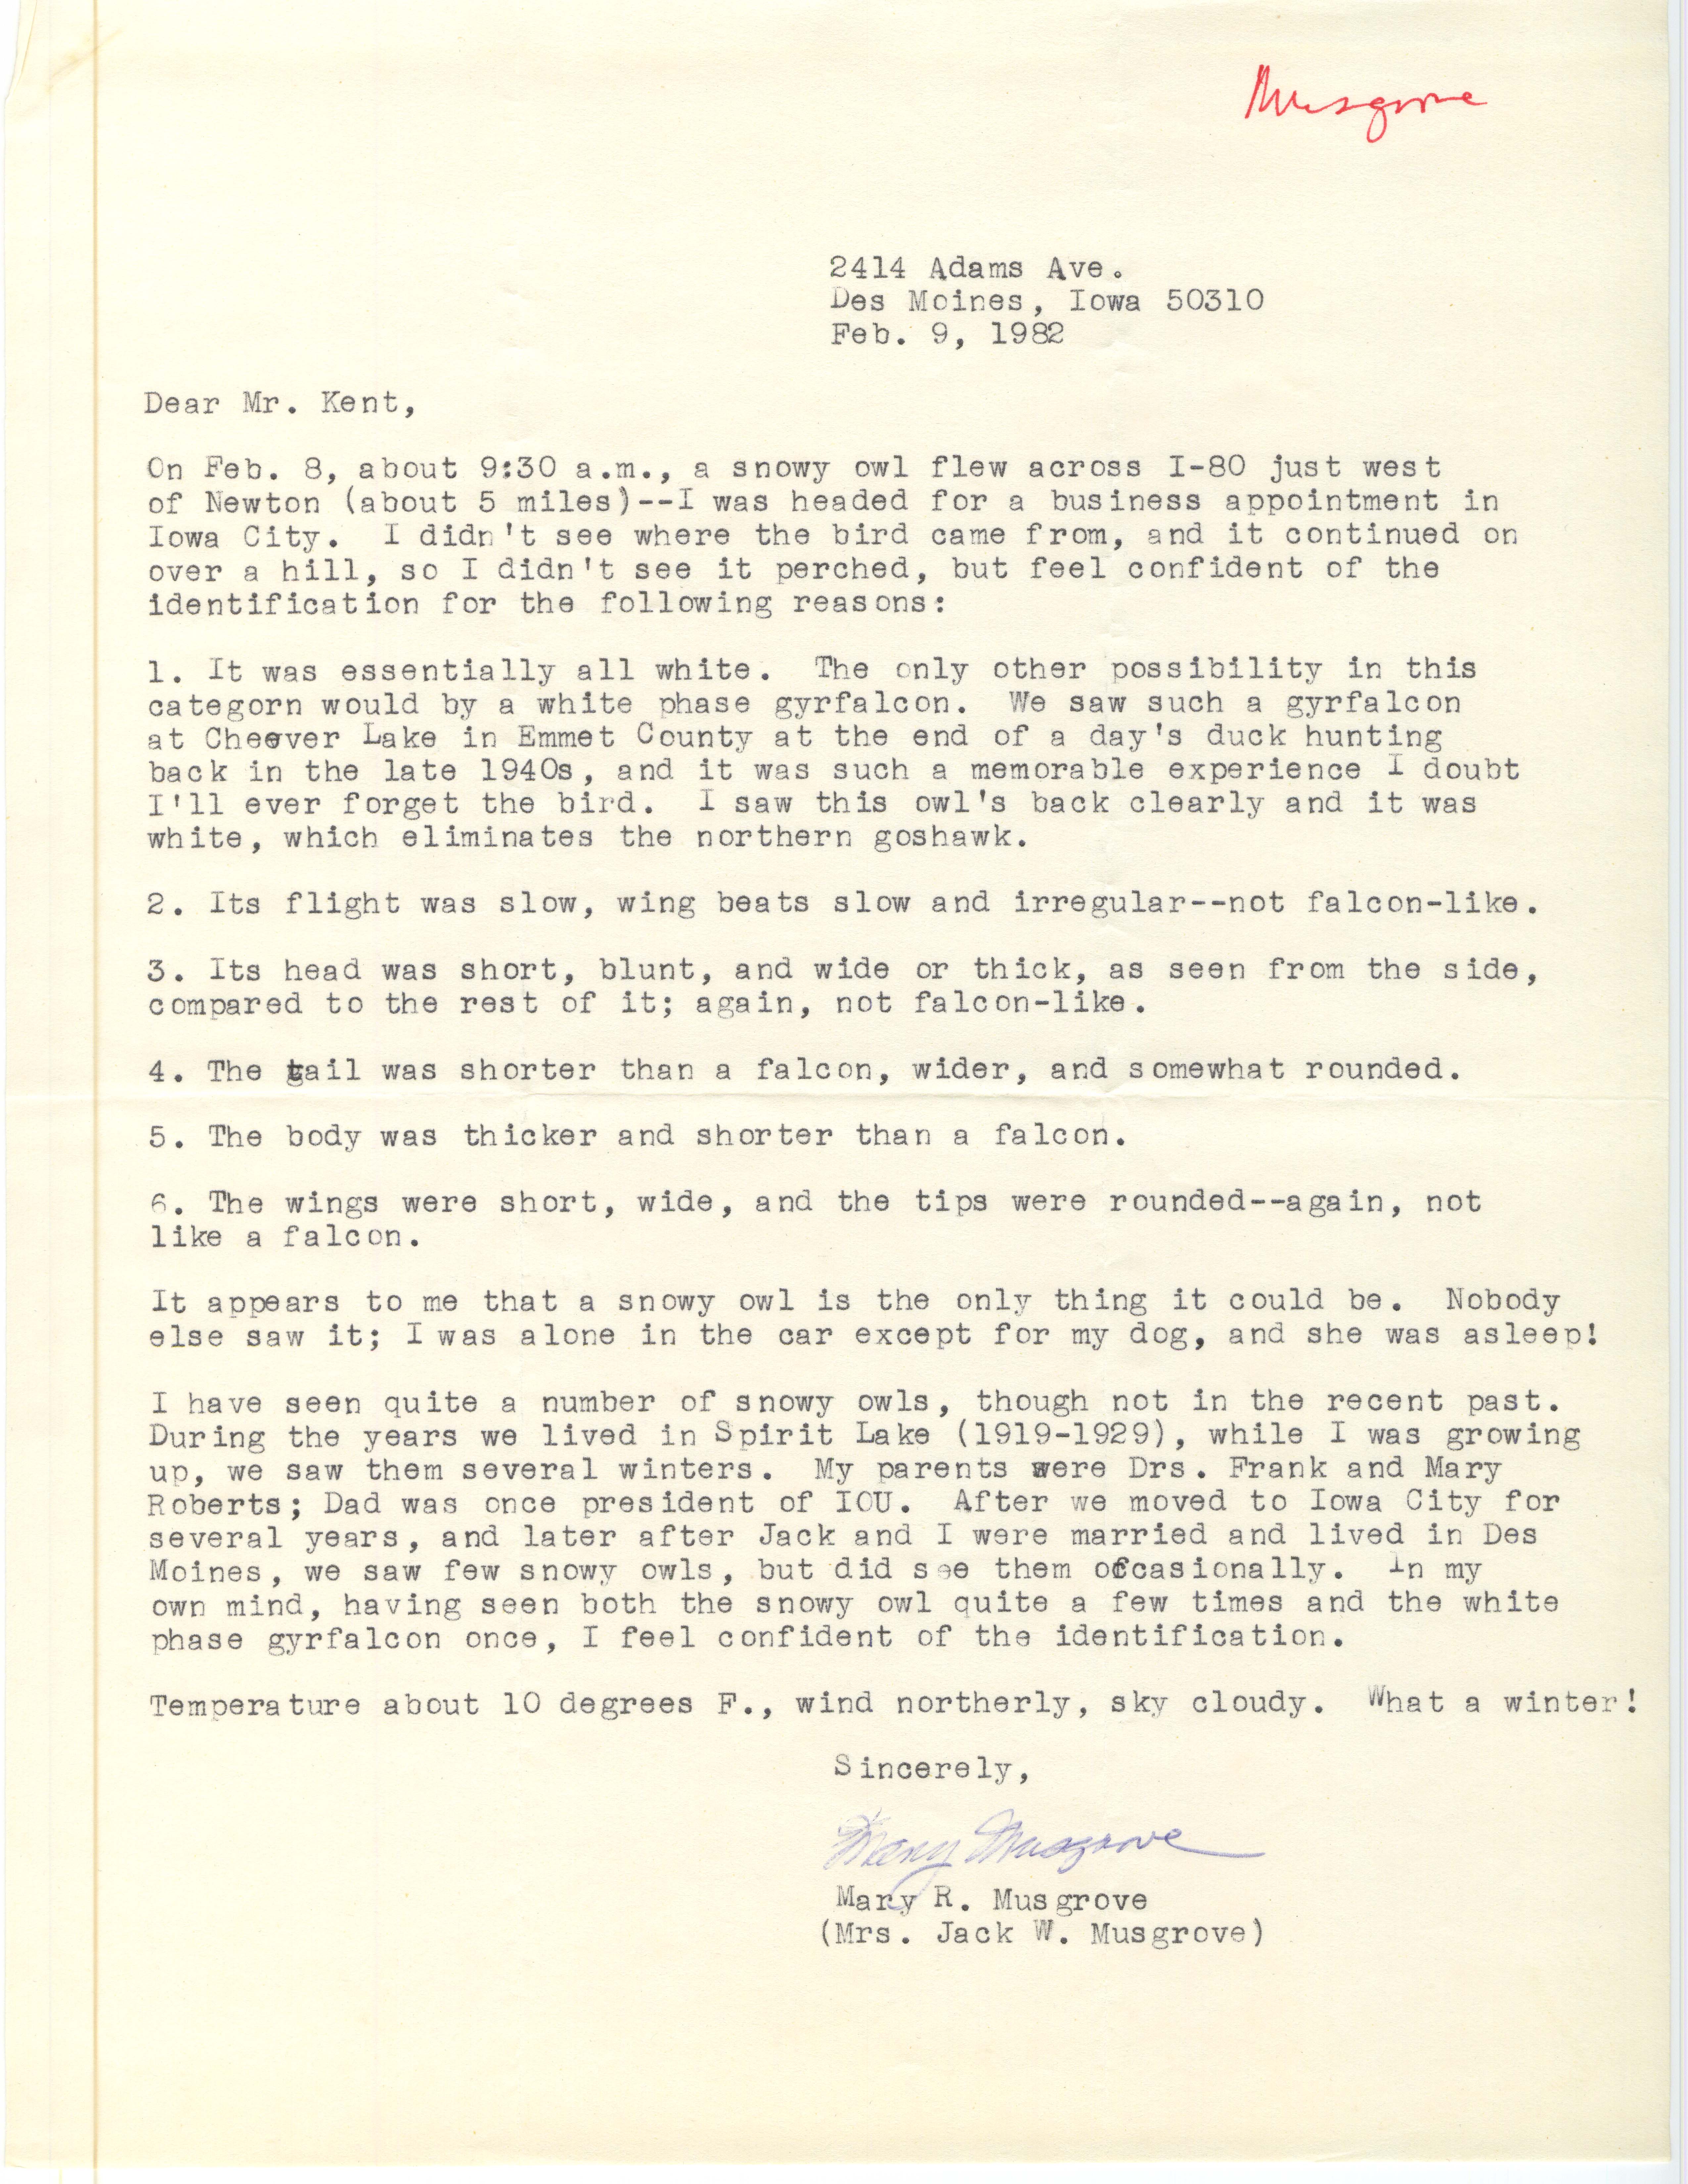 Mary R. Musgrove letter to Thomas H. Kent regarding field notes of a Snowy Owl sighting, February 9, 1982